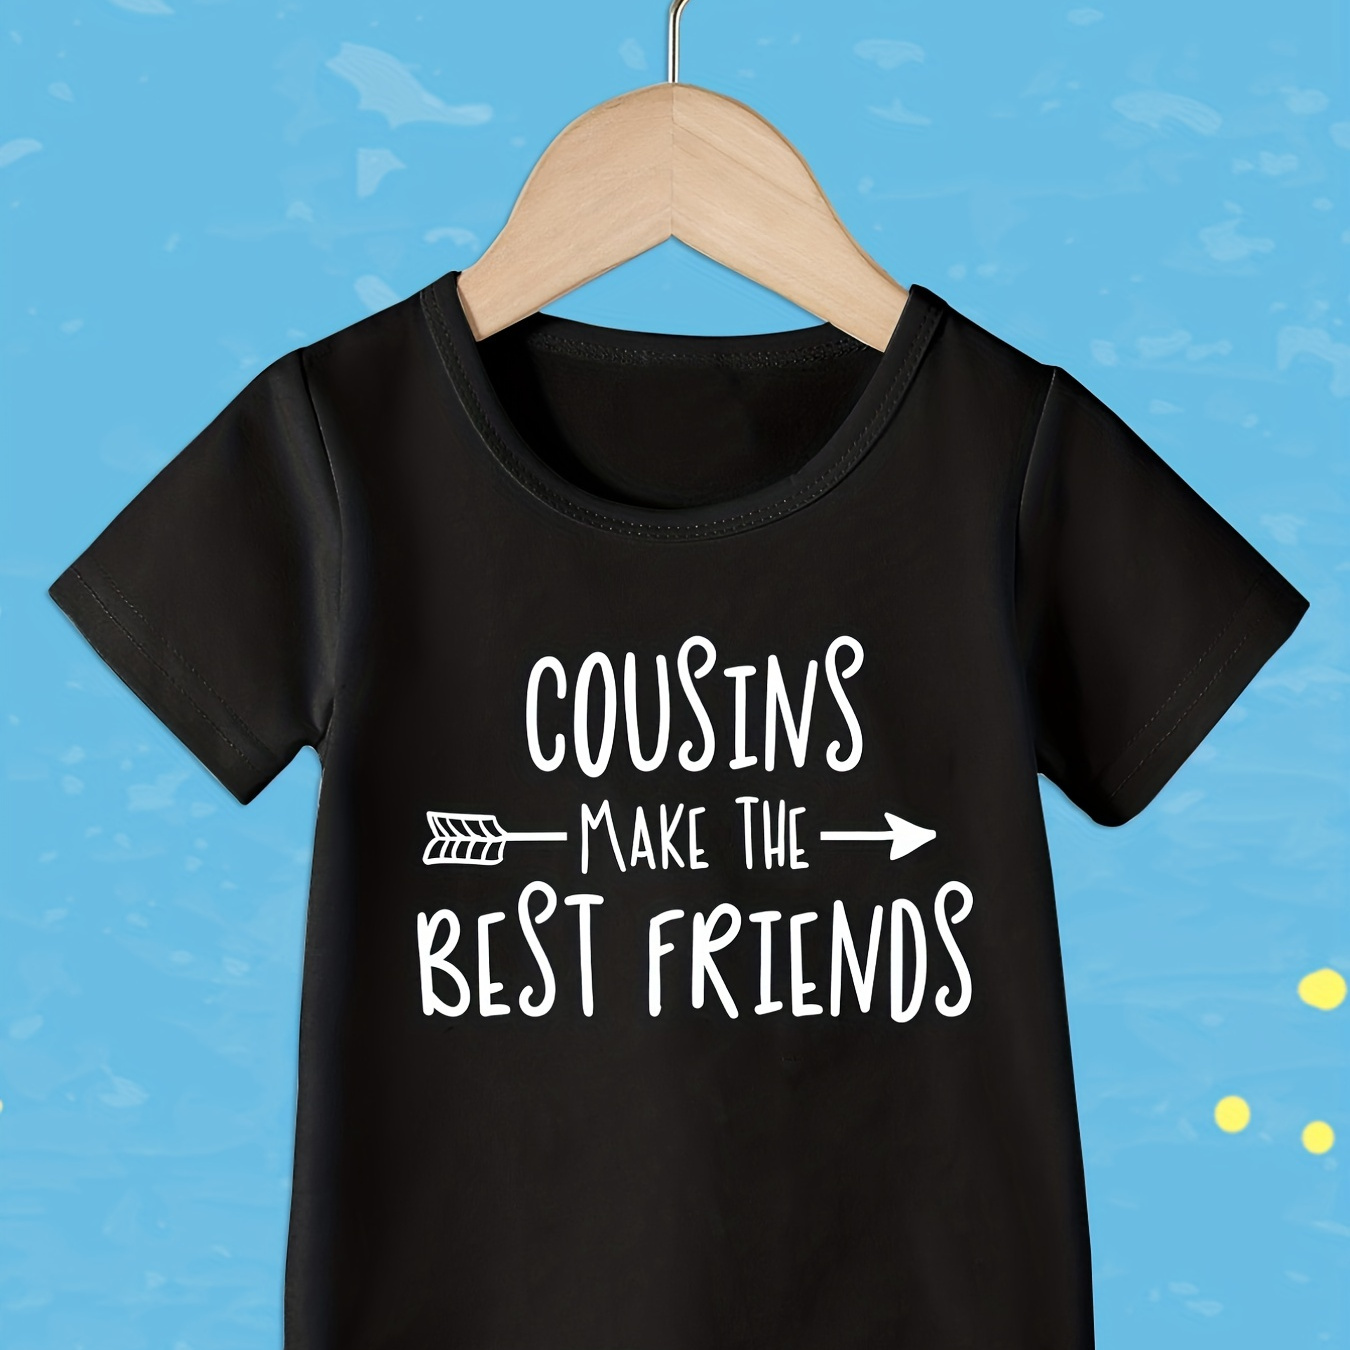 

cousins Make The Best Friends" T-shirt, Round Neck Tees Tops Casual Soft Comfortable, Boys And Girls Summer Clothes